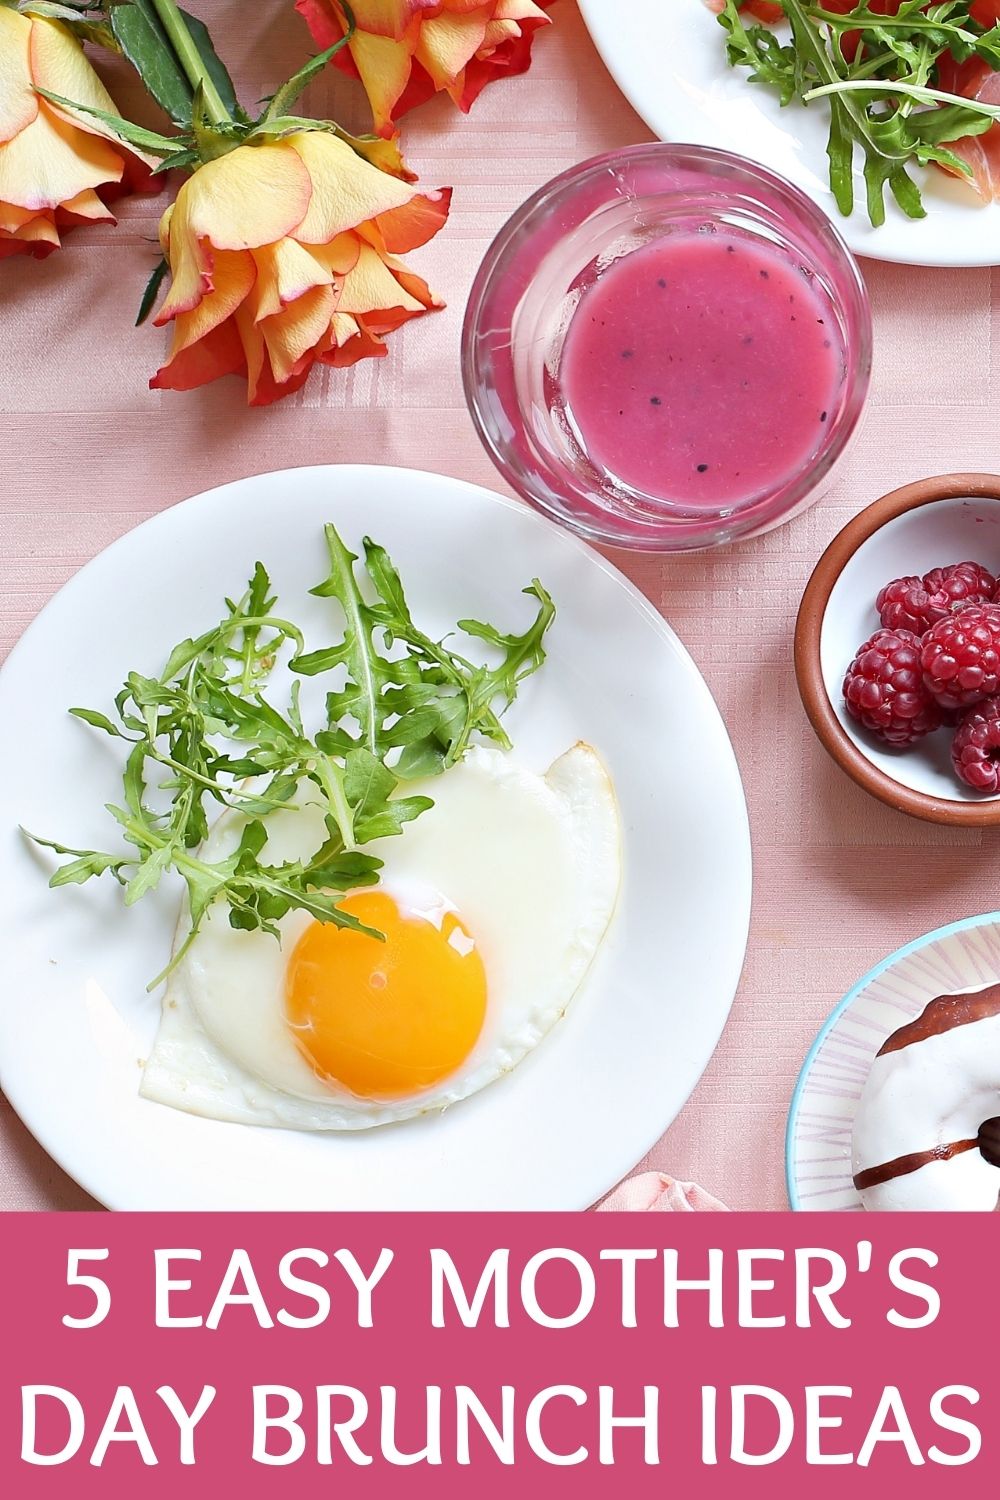 5 easy mother's day brunch ideas